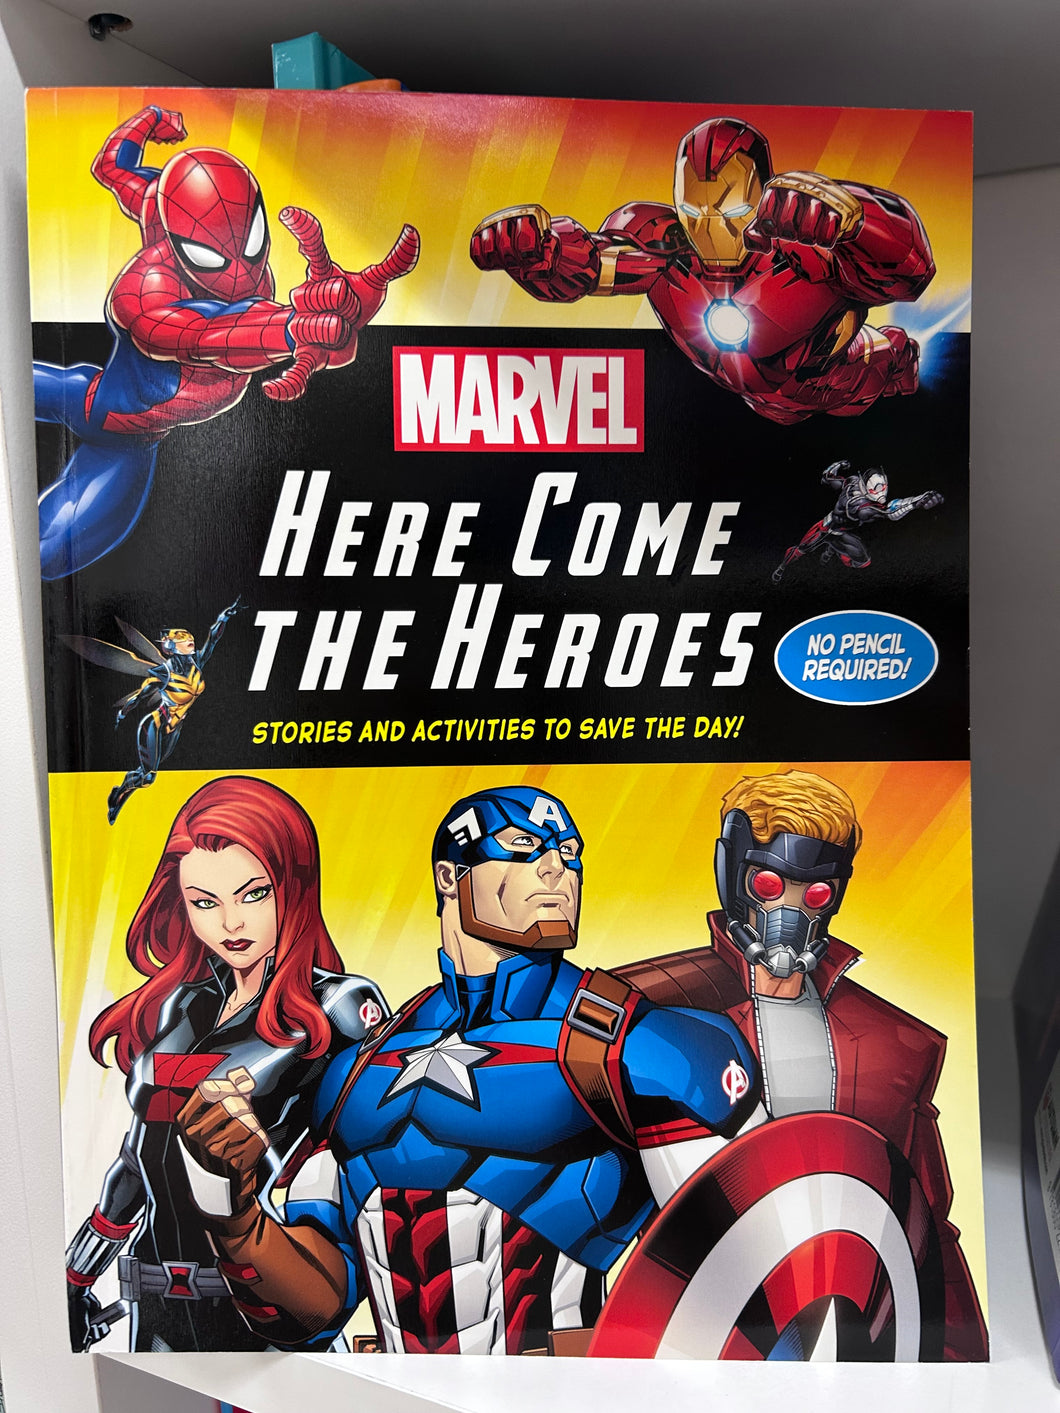 Marvel stories & activities book - Here comes the heroes